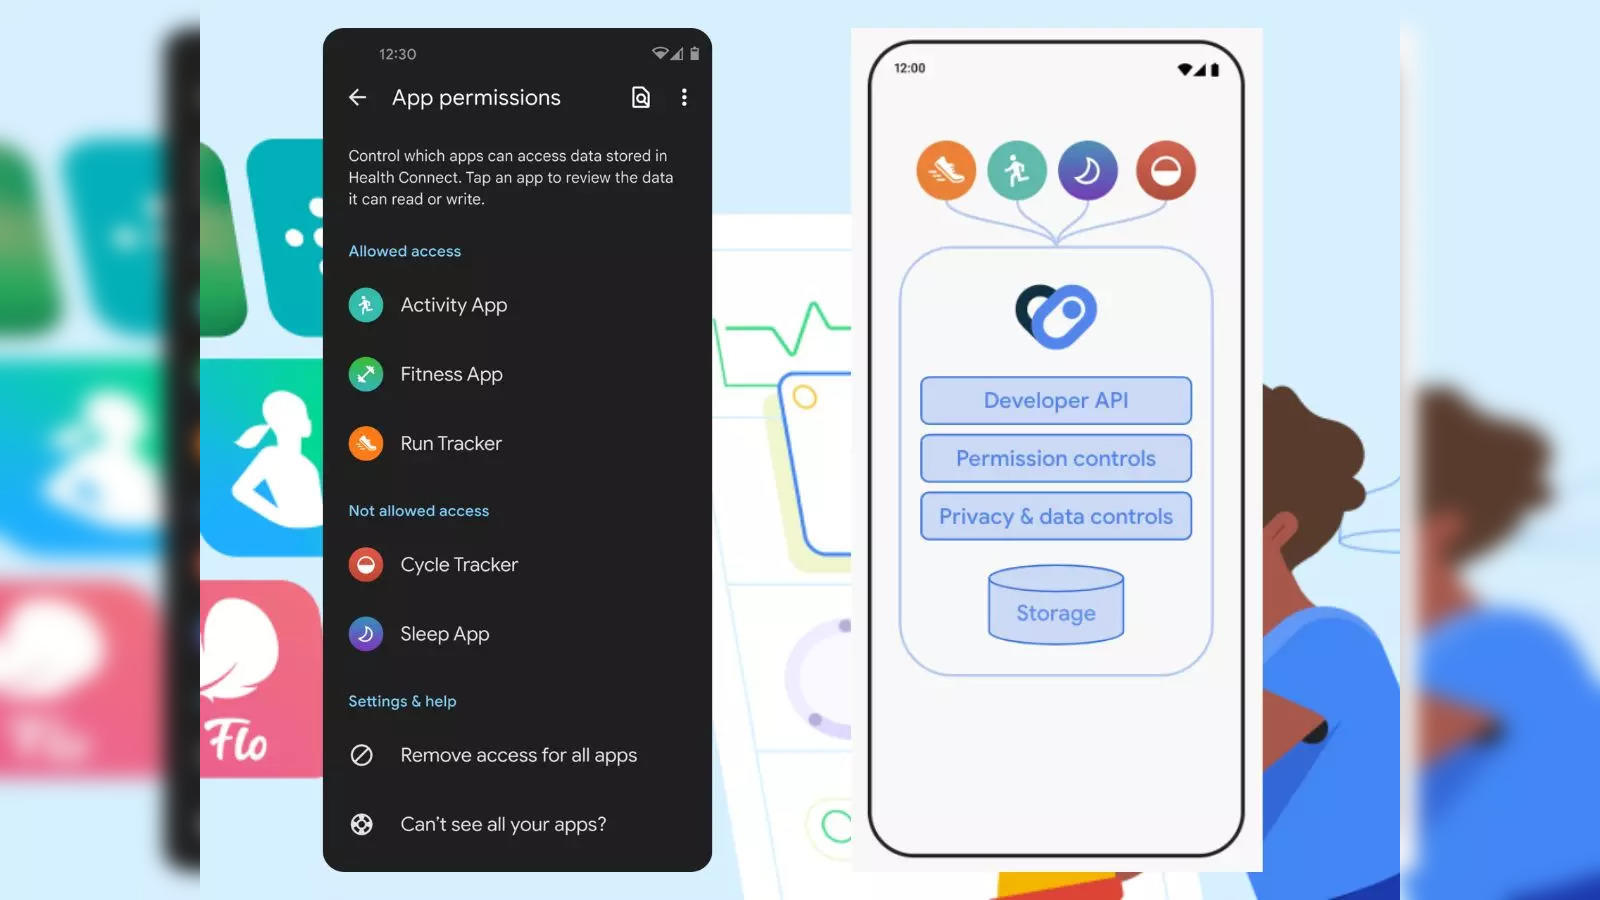 Google Fit Health App Is Finally Coming To iOS Users Too - Samma3a Tech